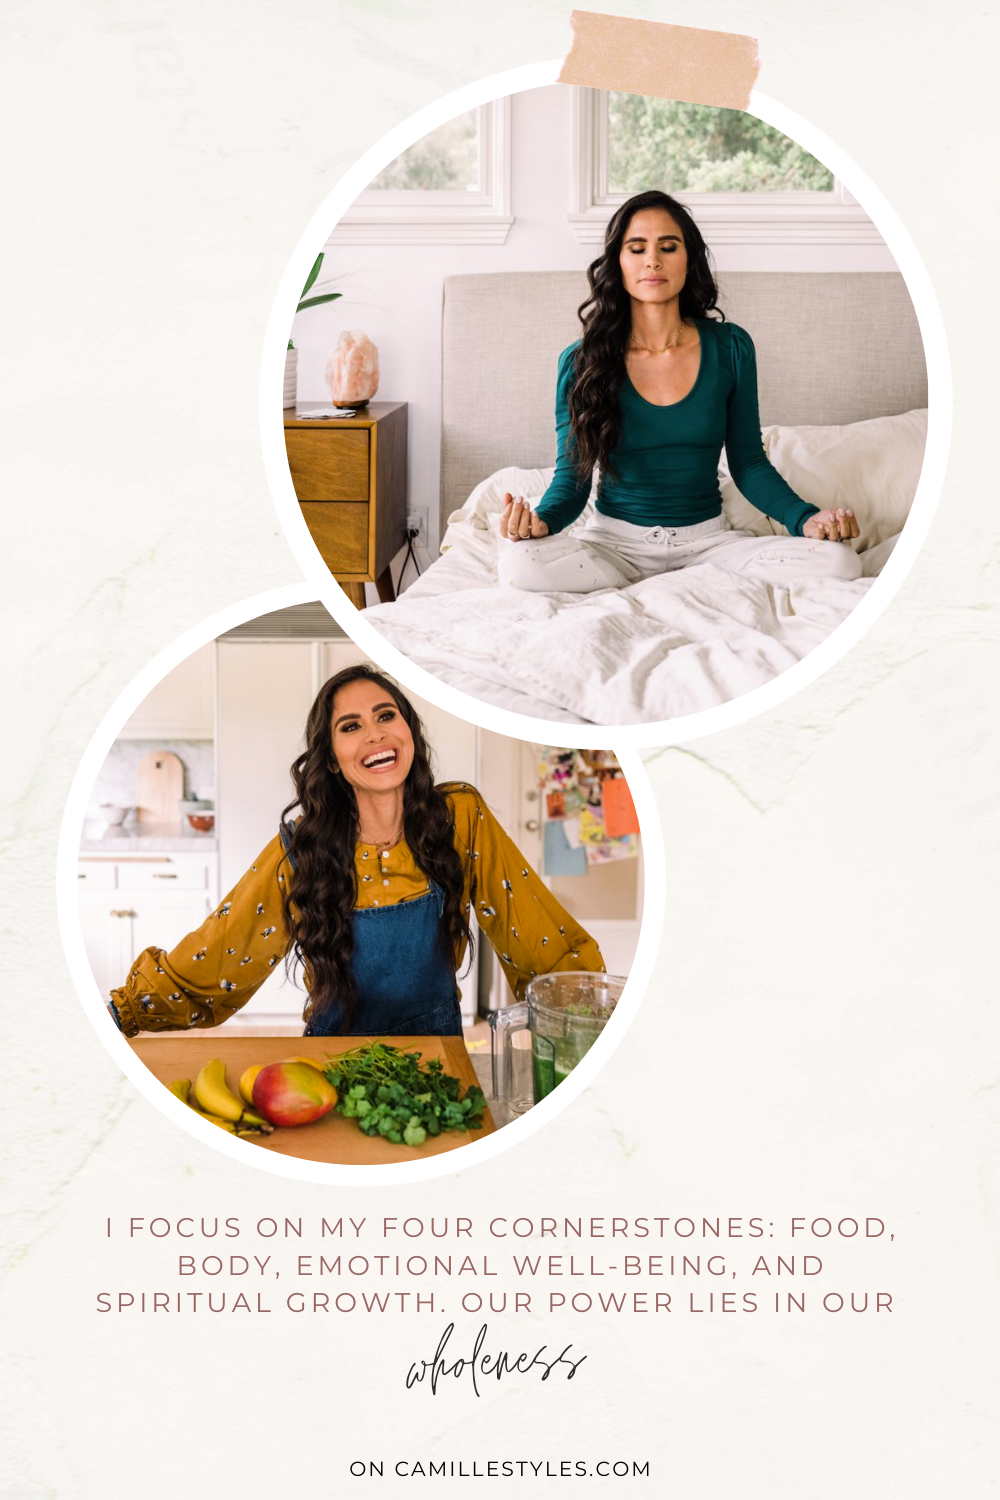 Kimberly Snyder's Morning Routine Is the Key to Her Glowing Health